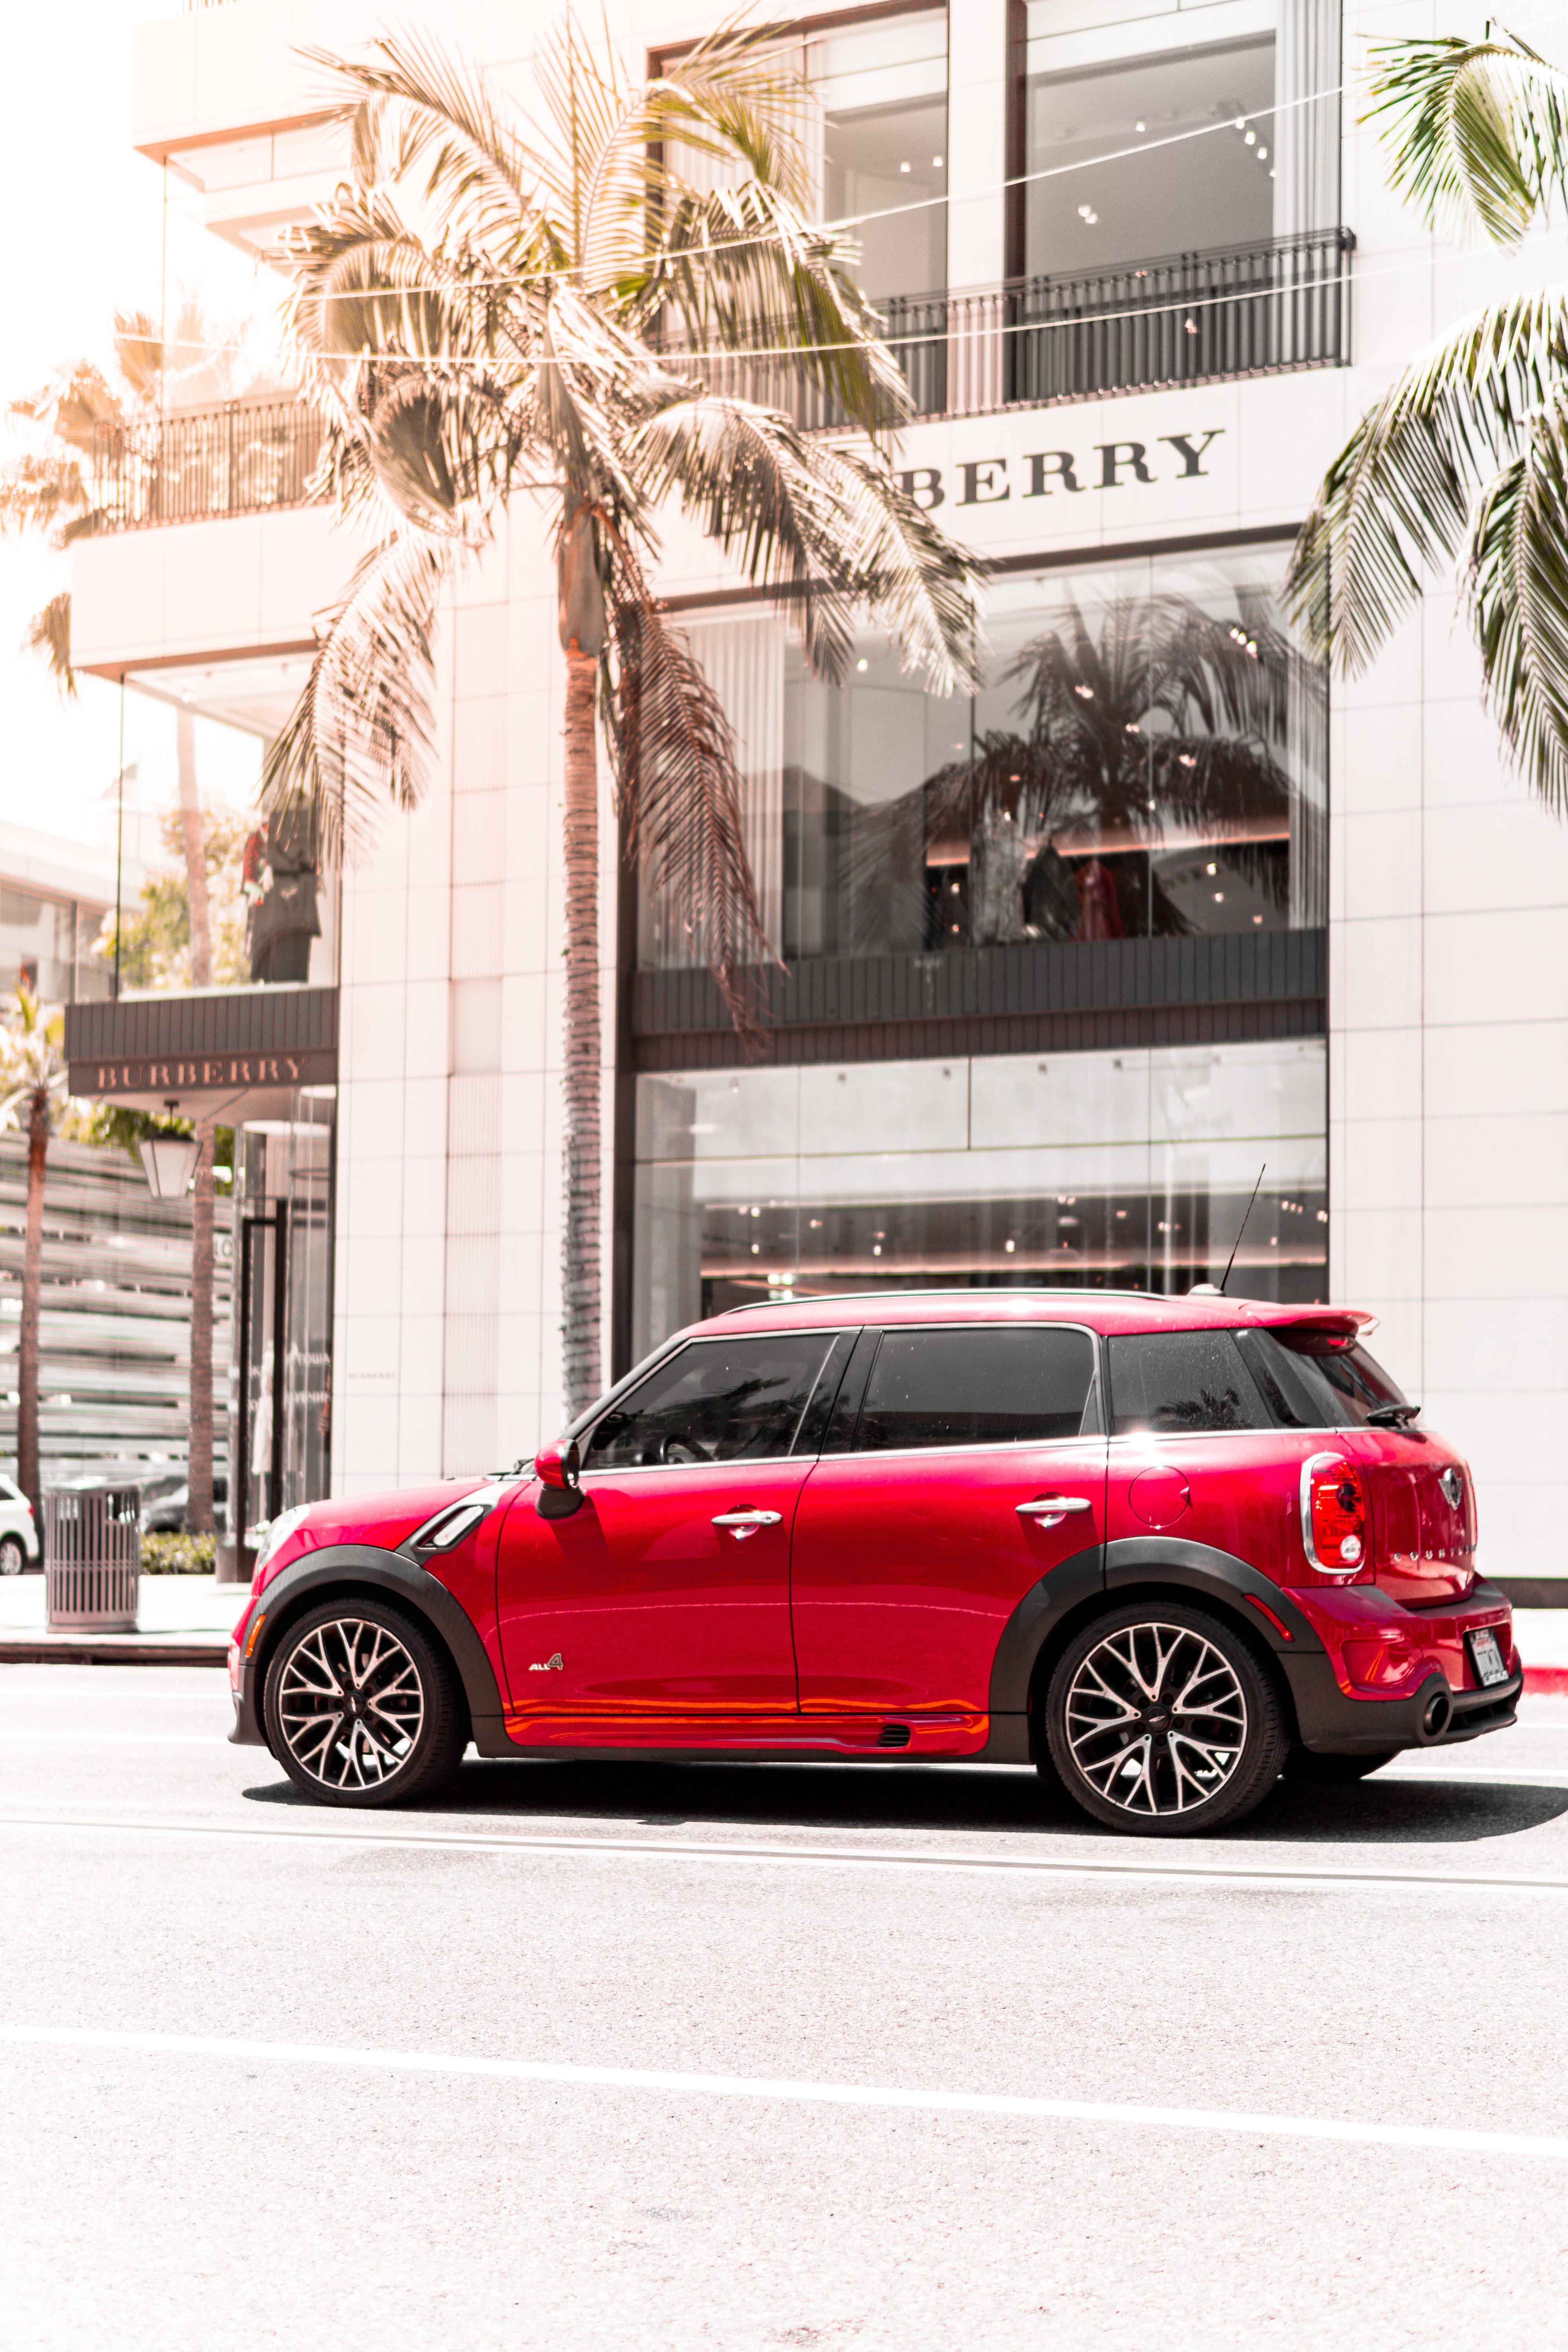 mini cooper, cars, red, street, mini, marque wallpapers for tablet